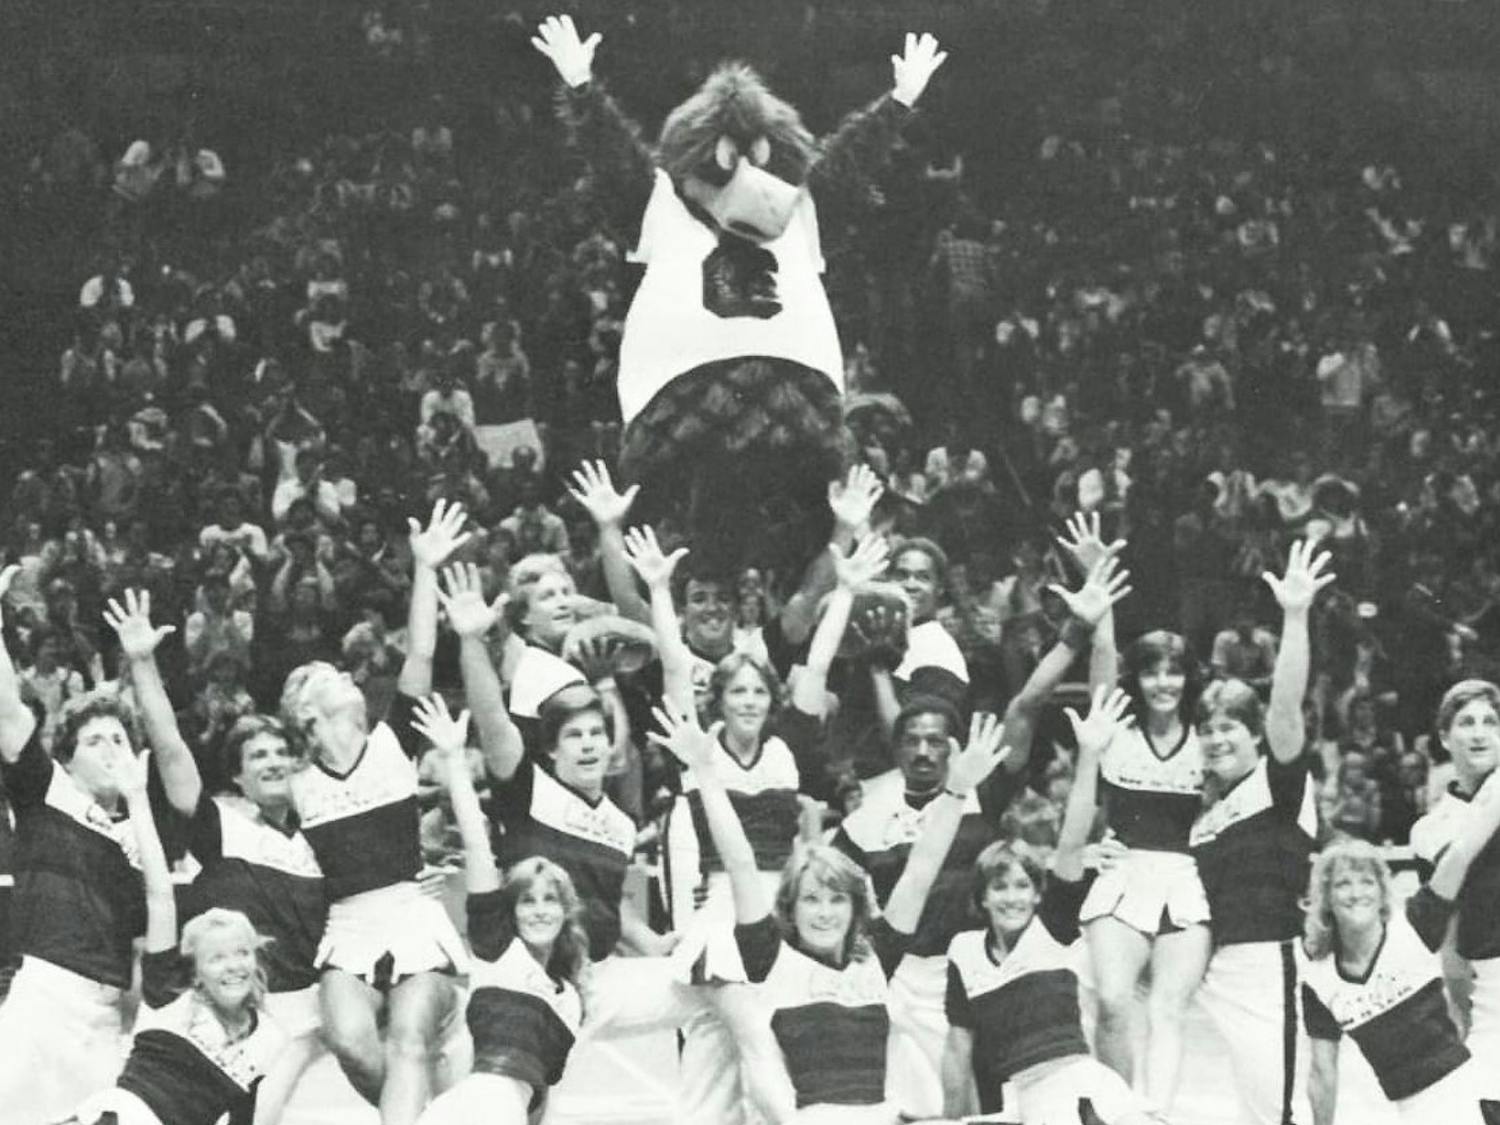 Cocky on the top of a cheer pyramid in 1982. John Routh, the man in the suit at the time, went on to become a mascot at the University of Miami. &nbsp;